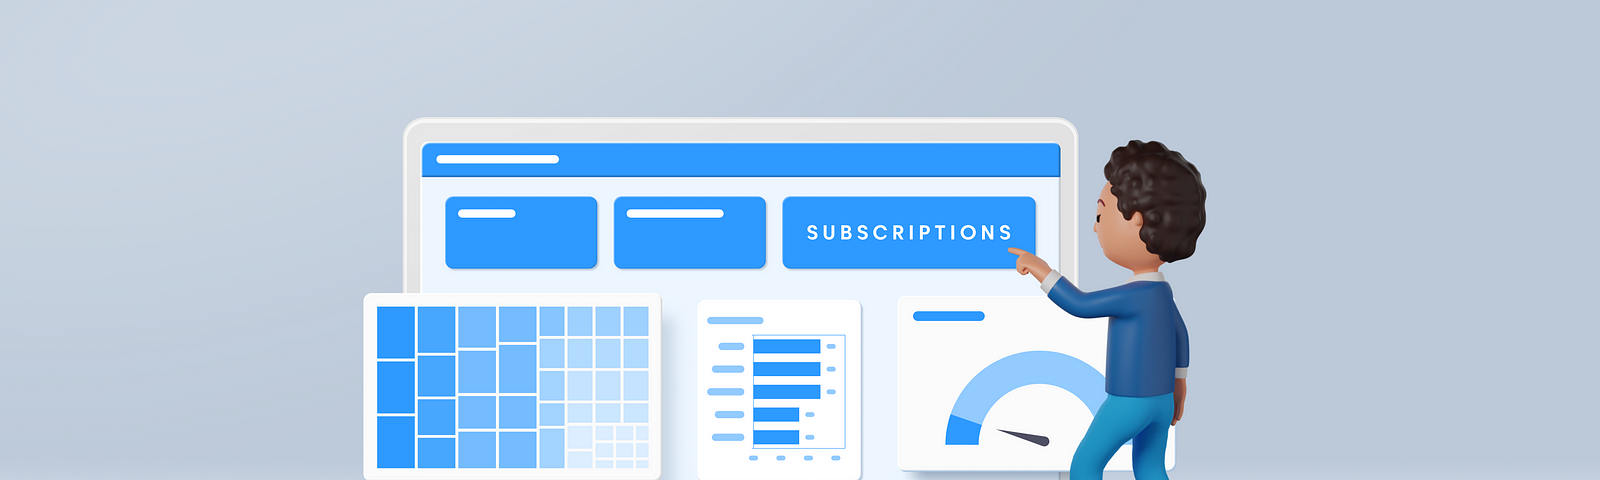 Enhance Your Finances by Using an Embedded Subscription Management System